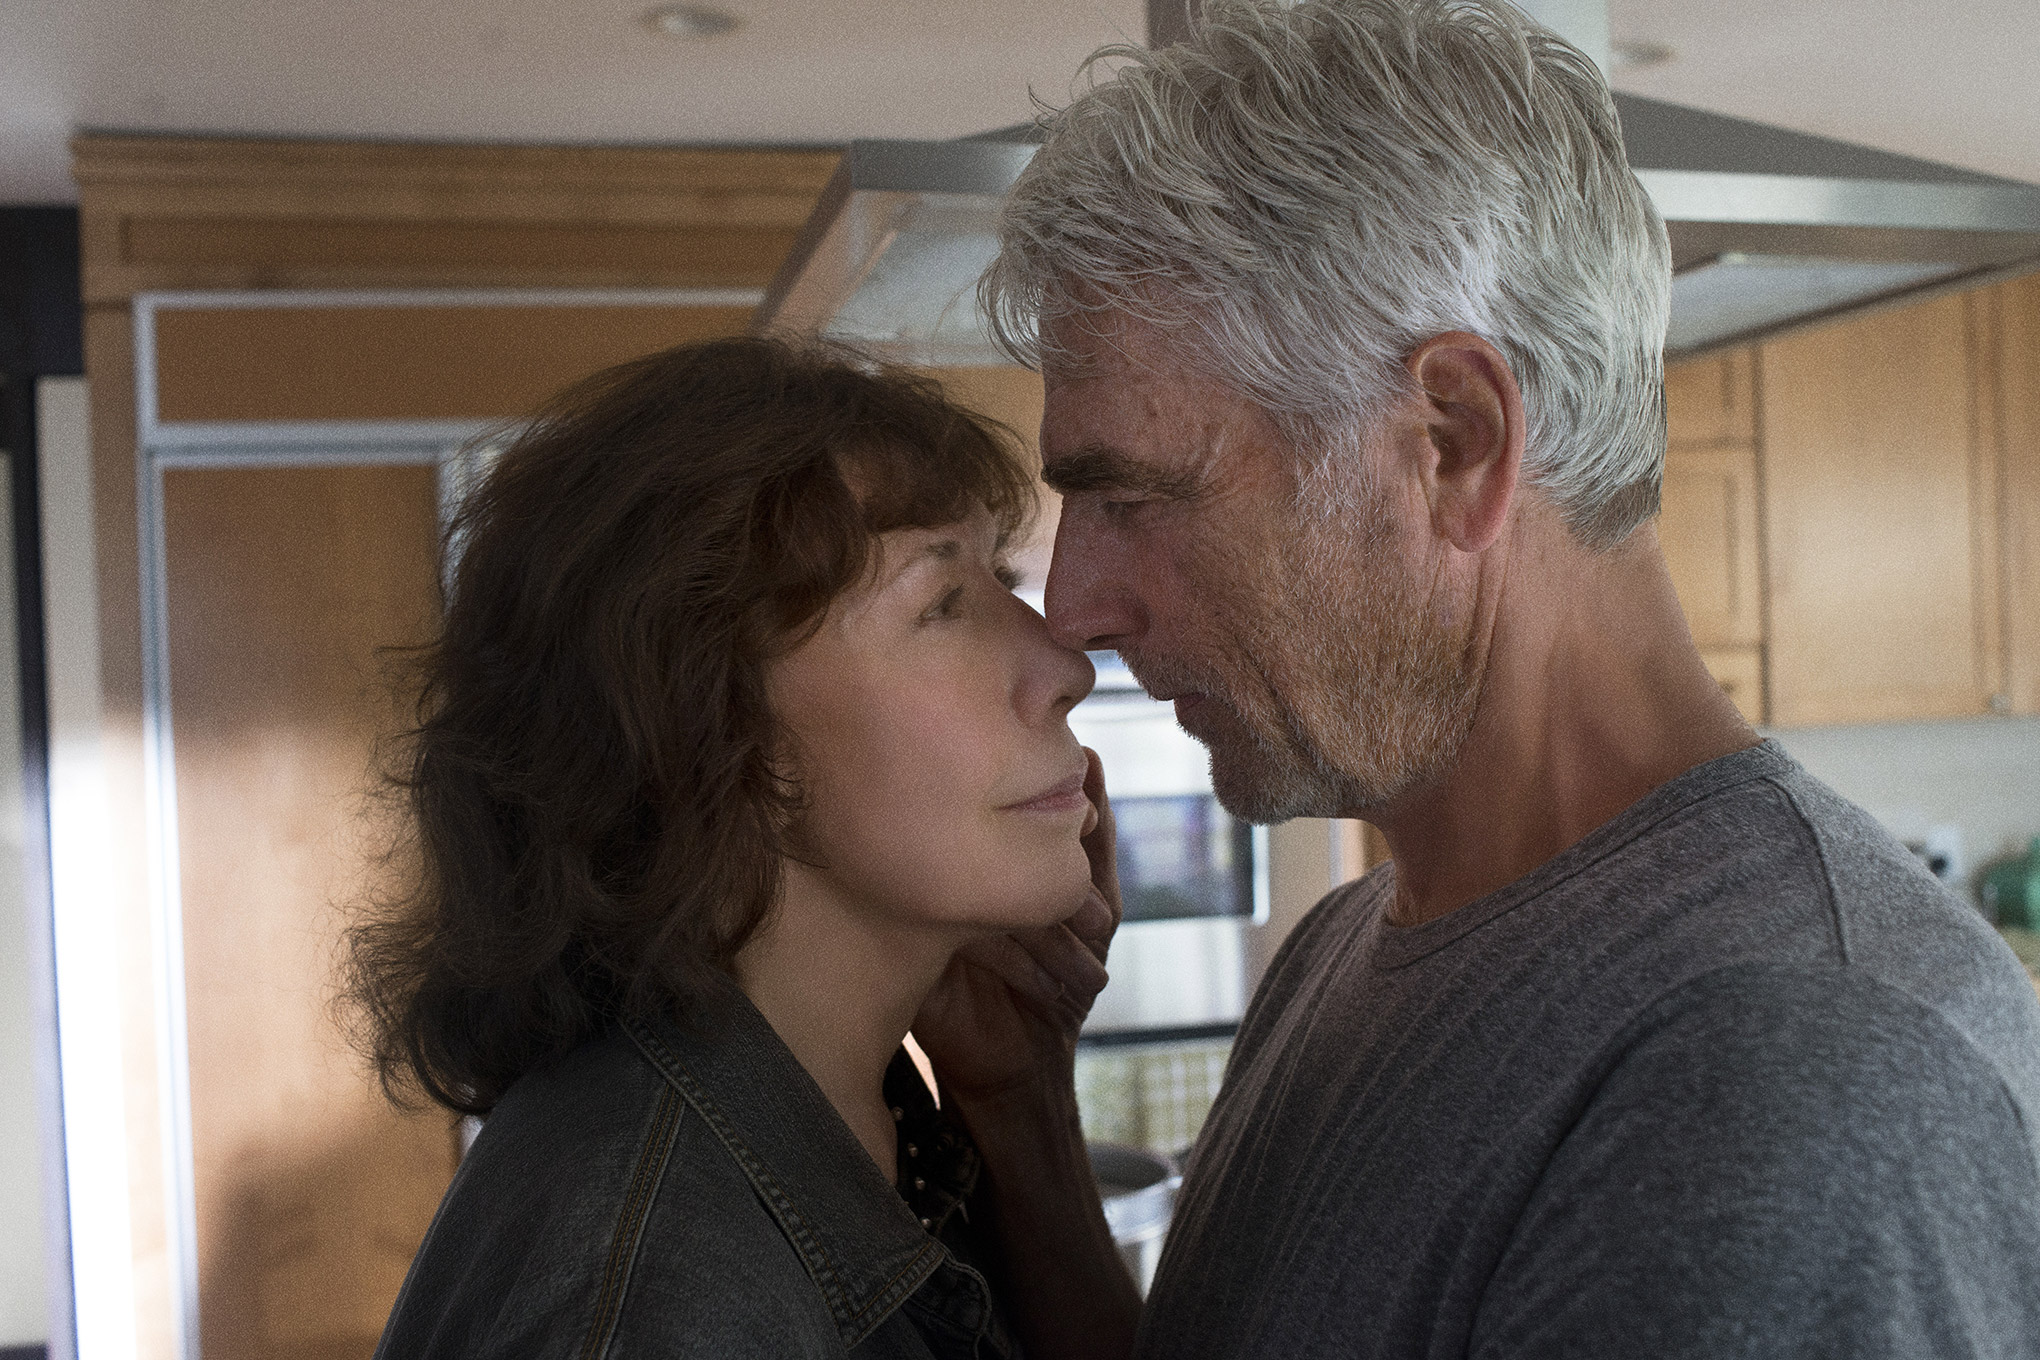 Writer/Director Paul Weitz on Making New Film ‘Grandma’ with the Voice of Actress Lily Tomlin